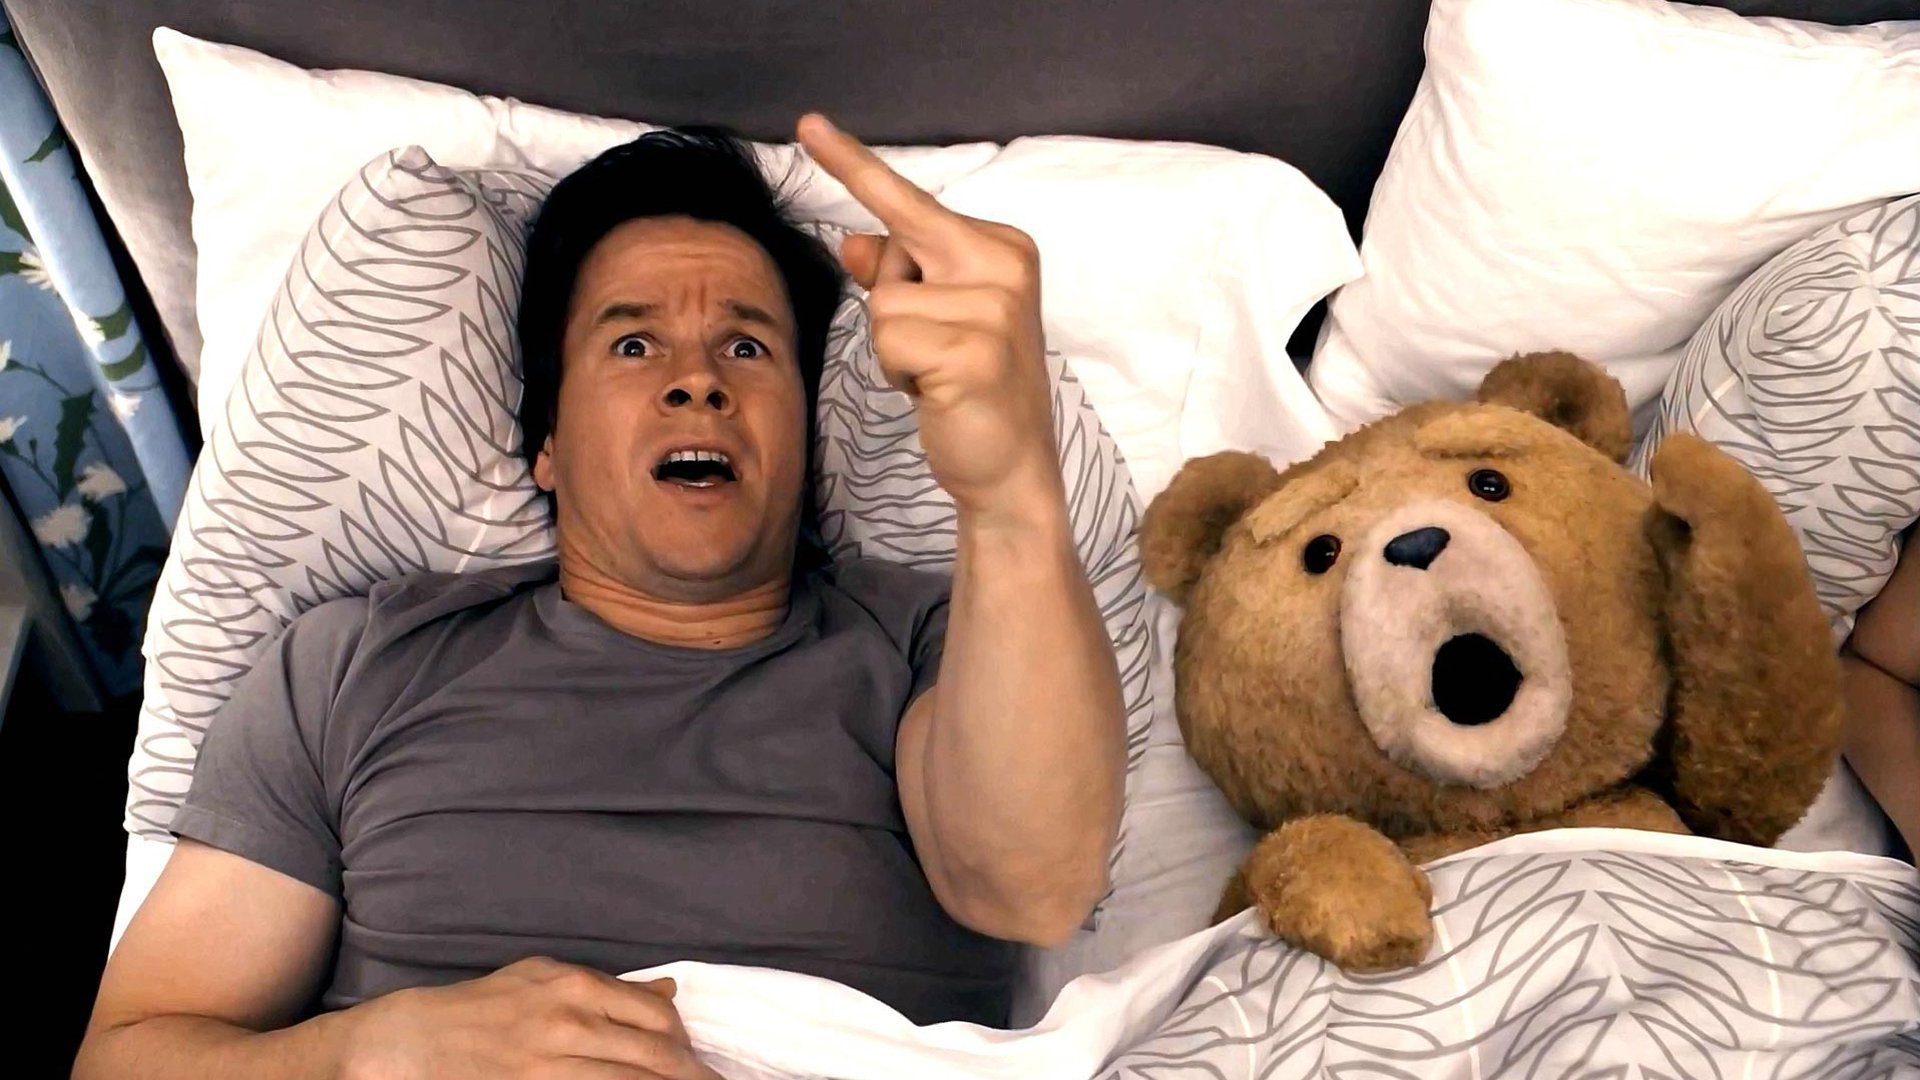 Ted Wallpapers 1920x1080 Full Hd 1080p Desktop Backgrounds